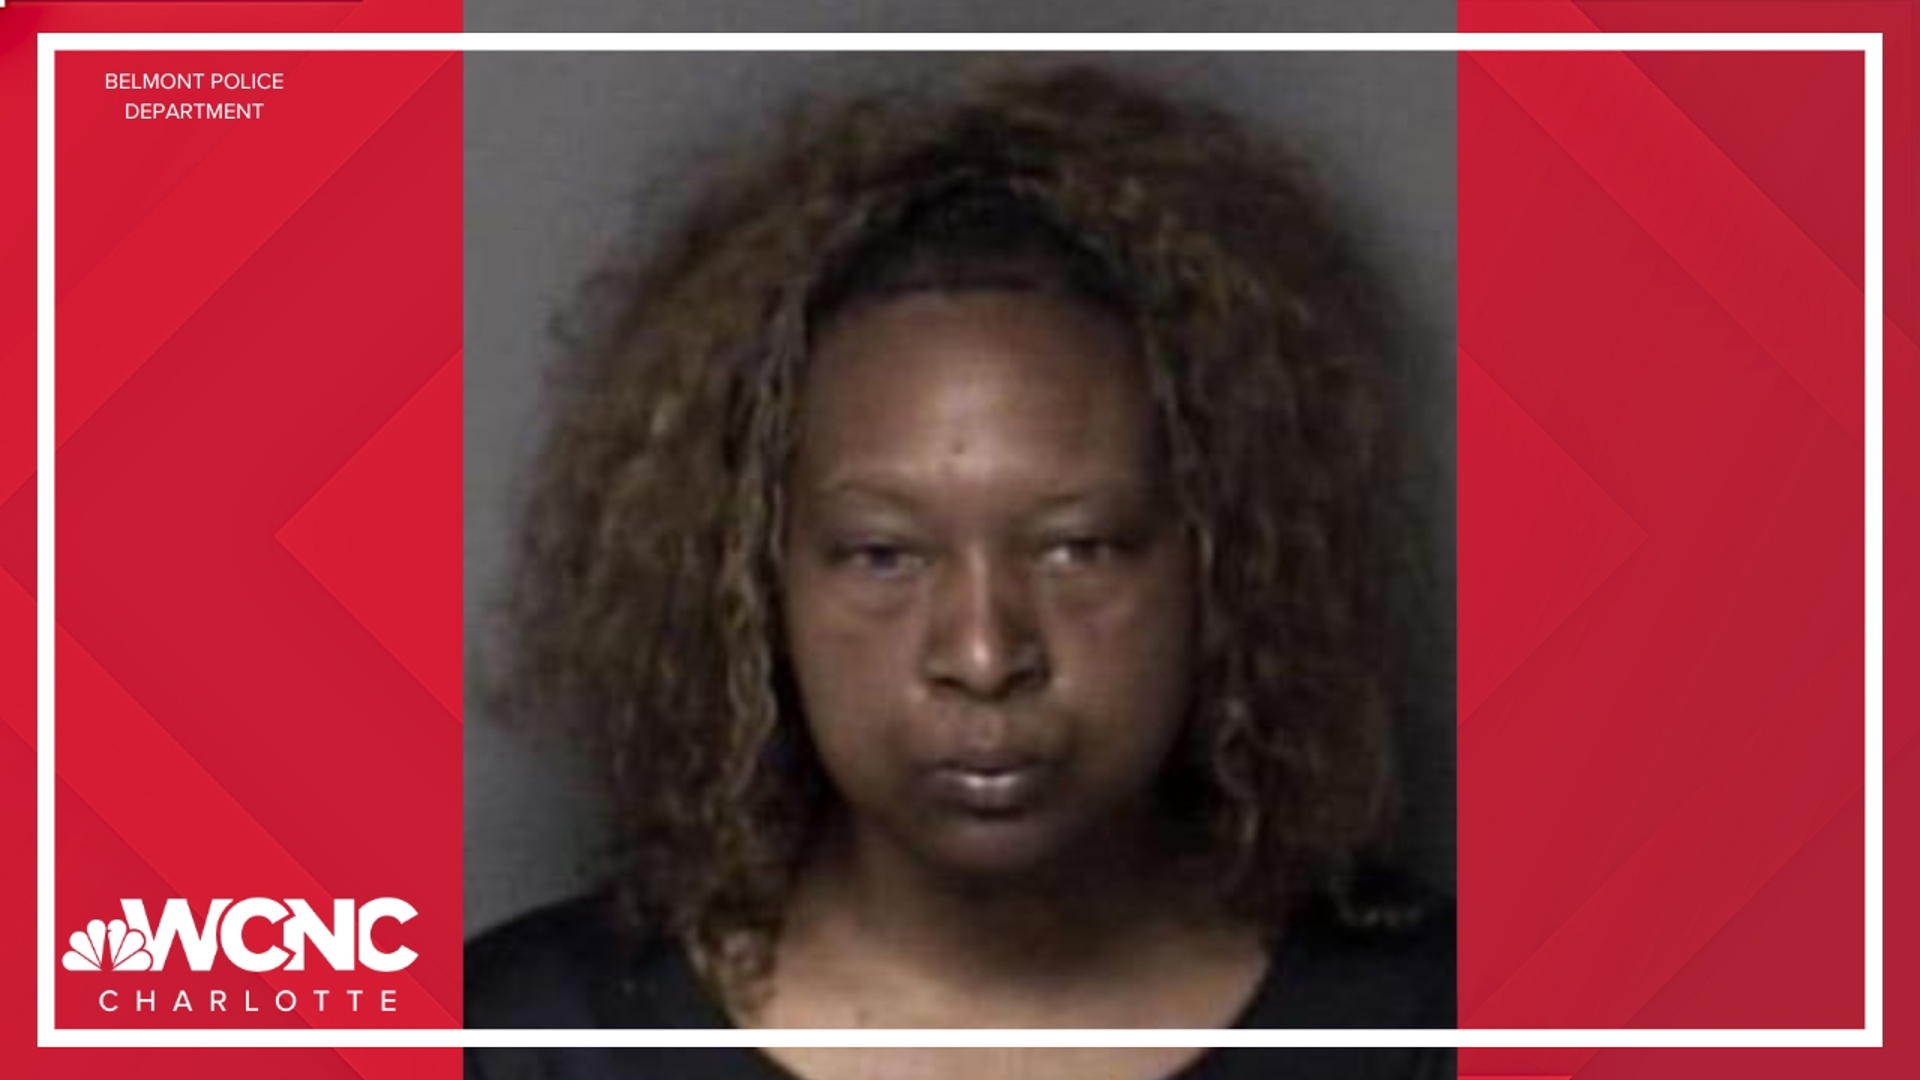 Records from Belmont police show that Yvette Ingram was arrested on May 1.